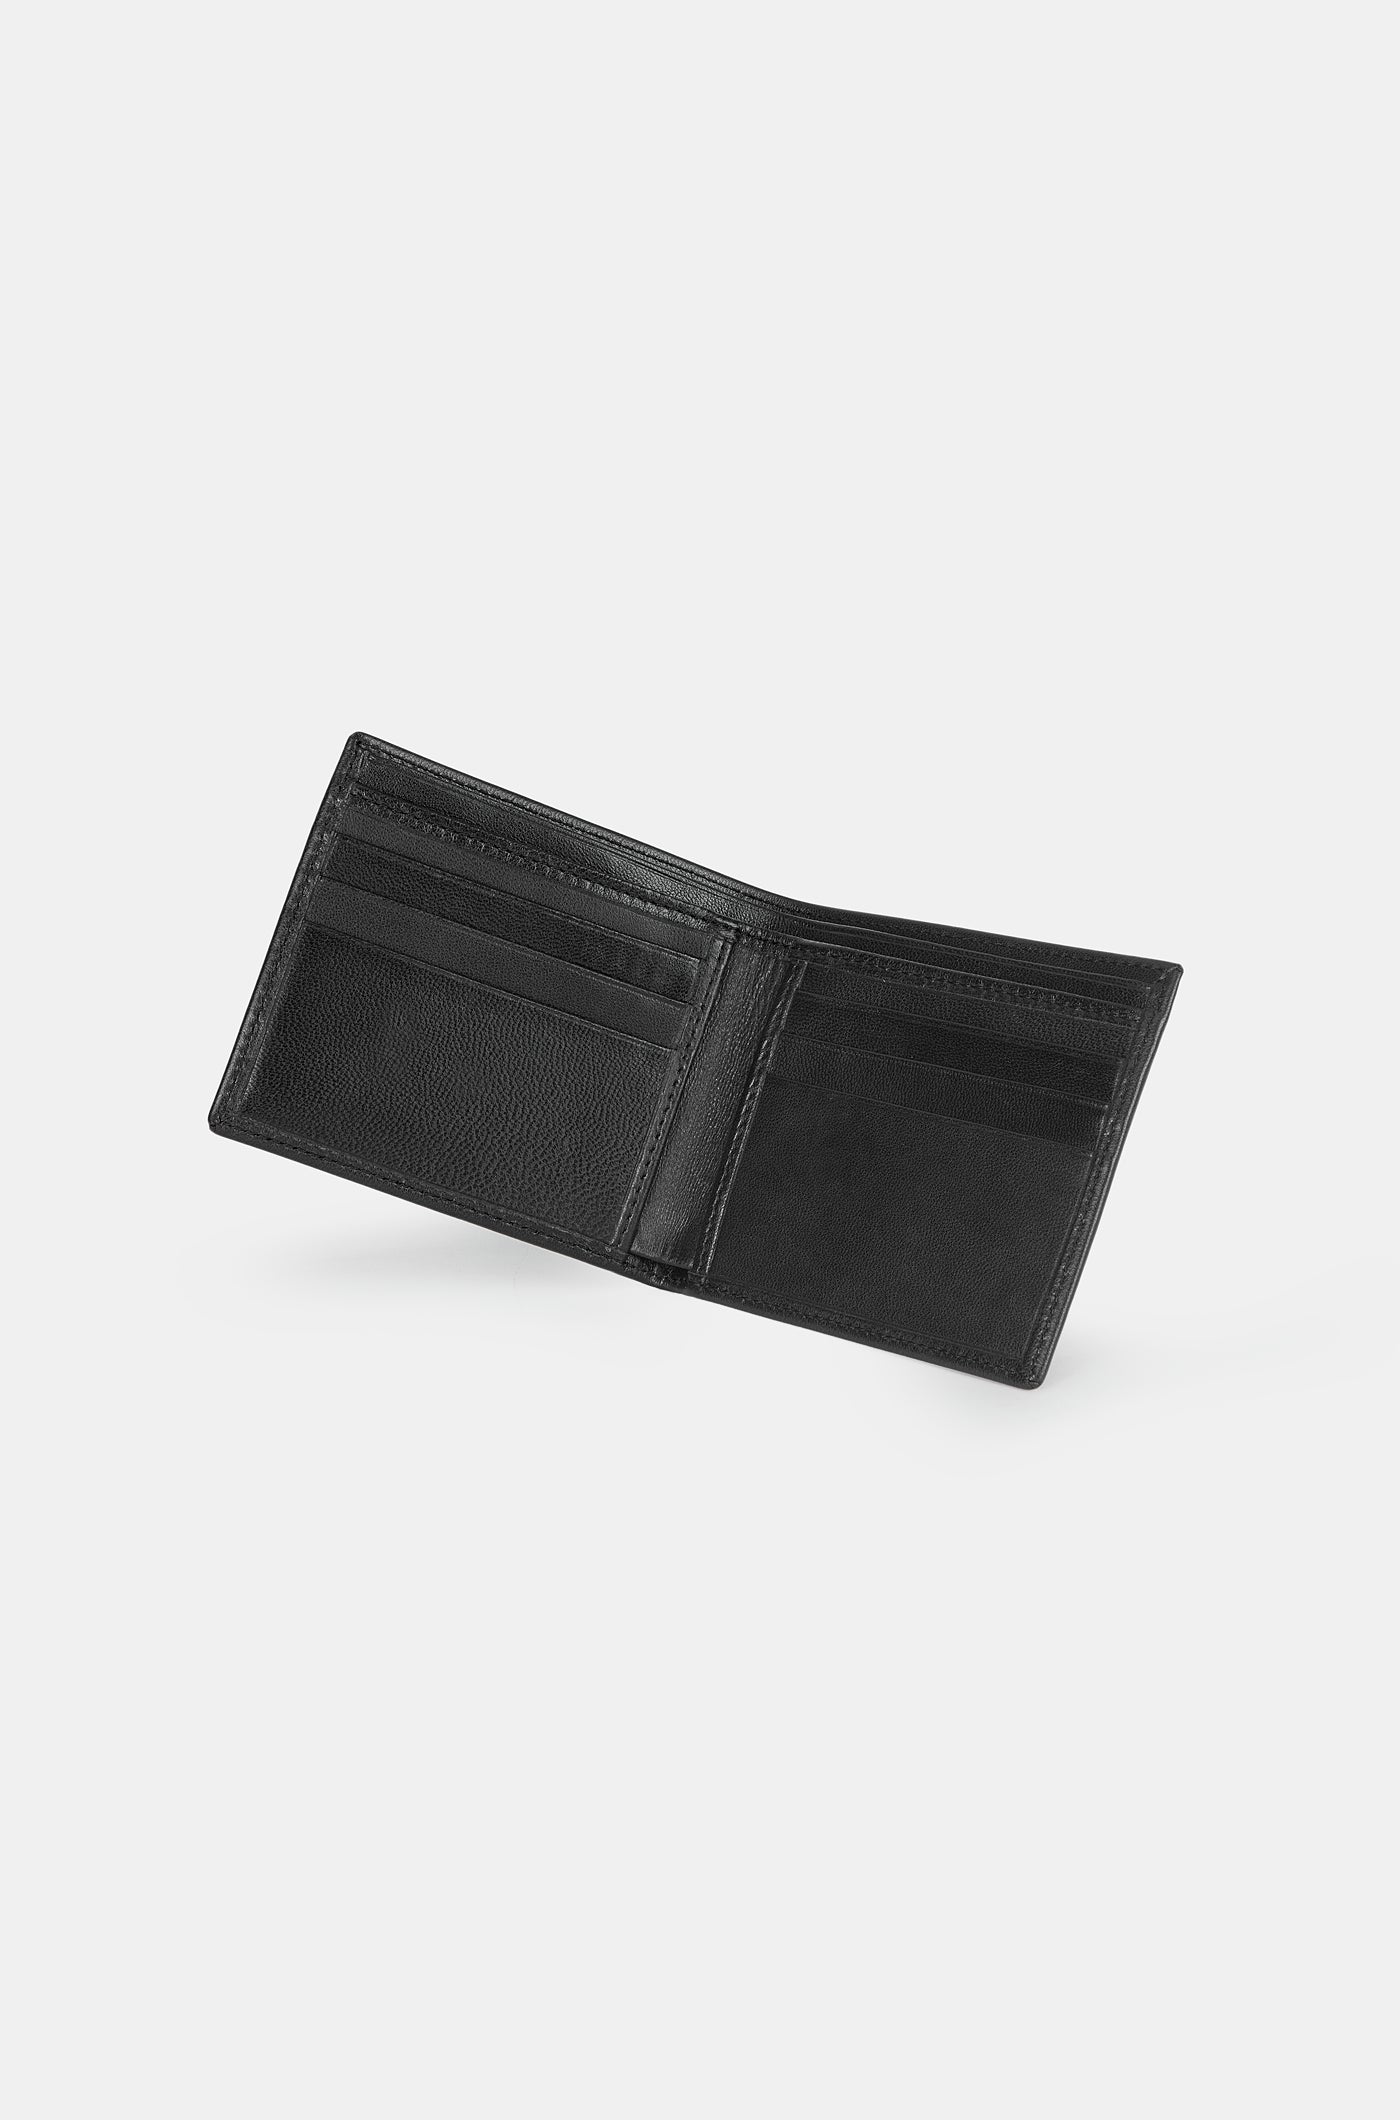 The Club Wallet